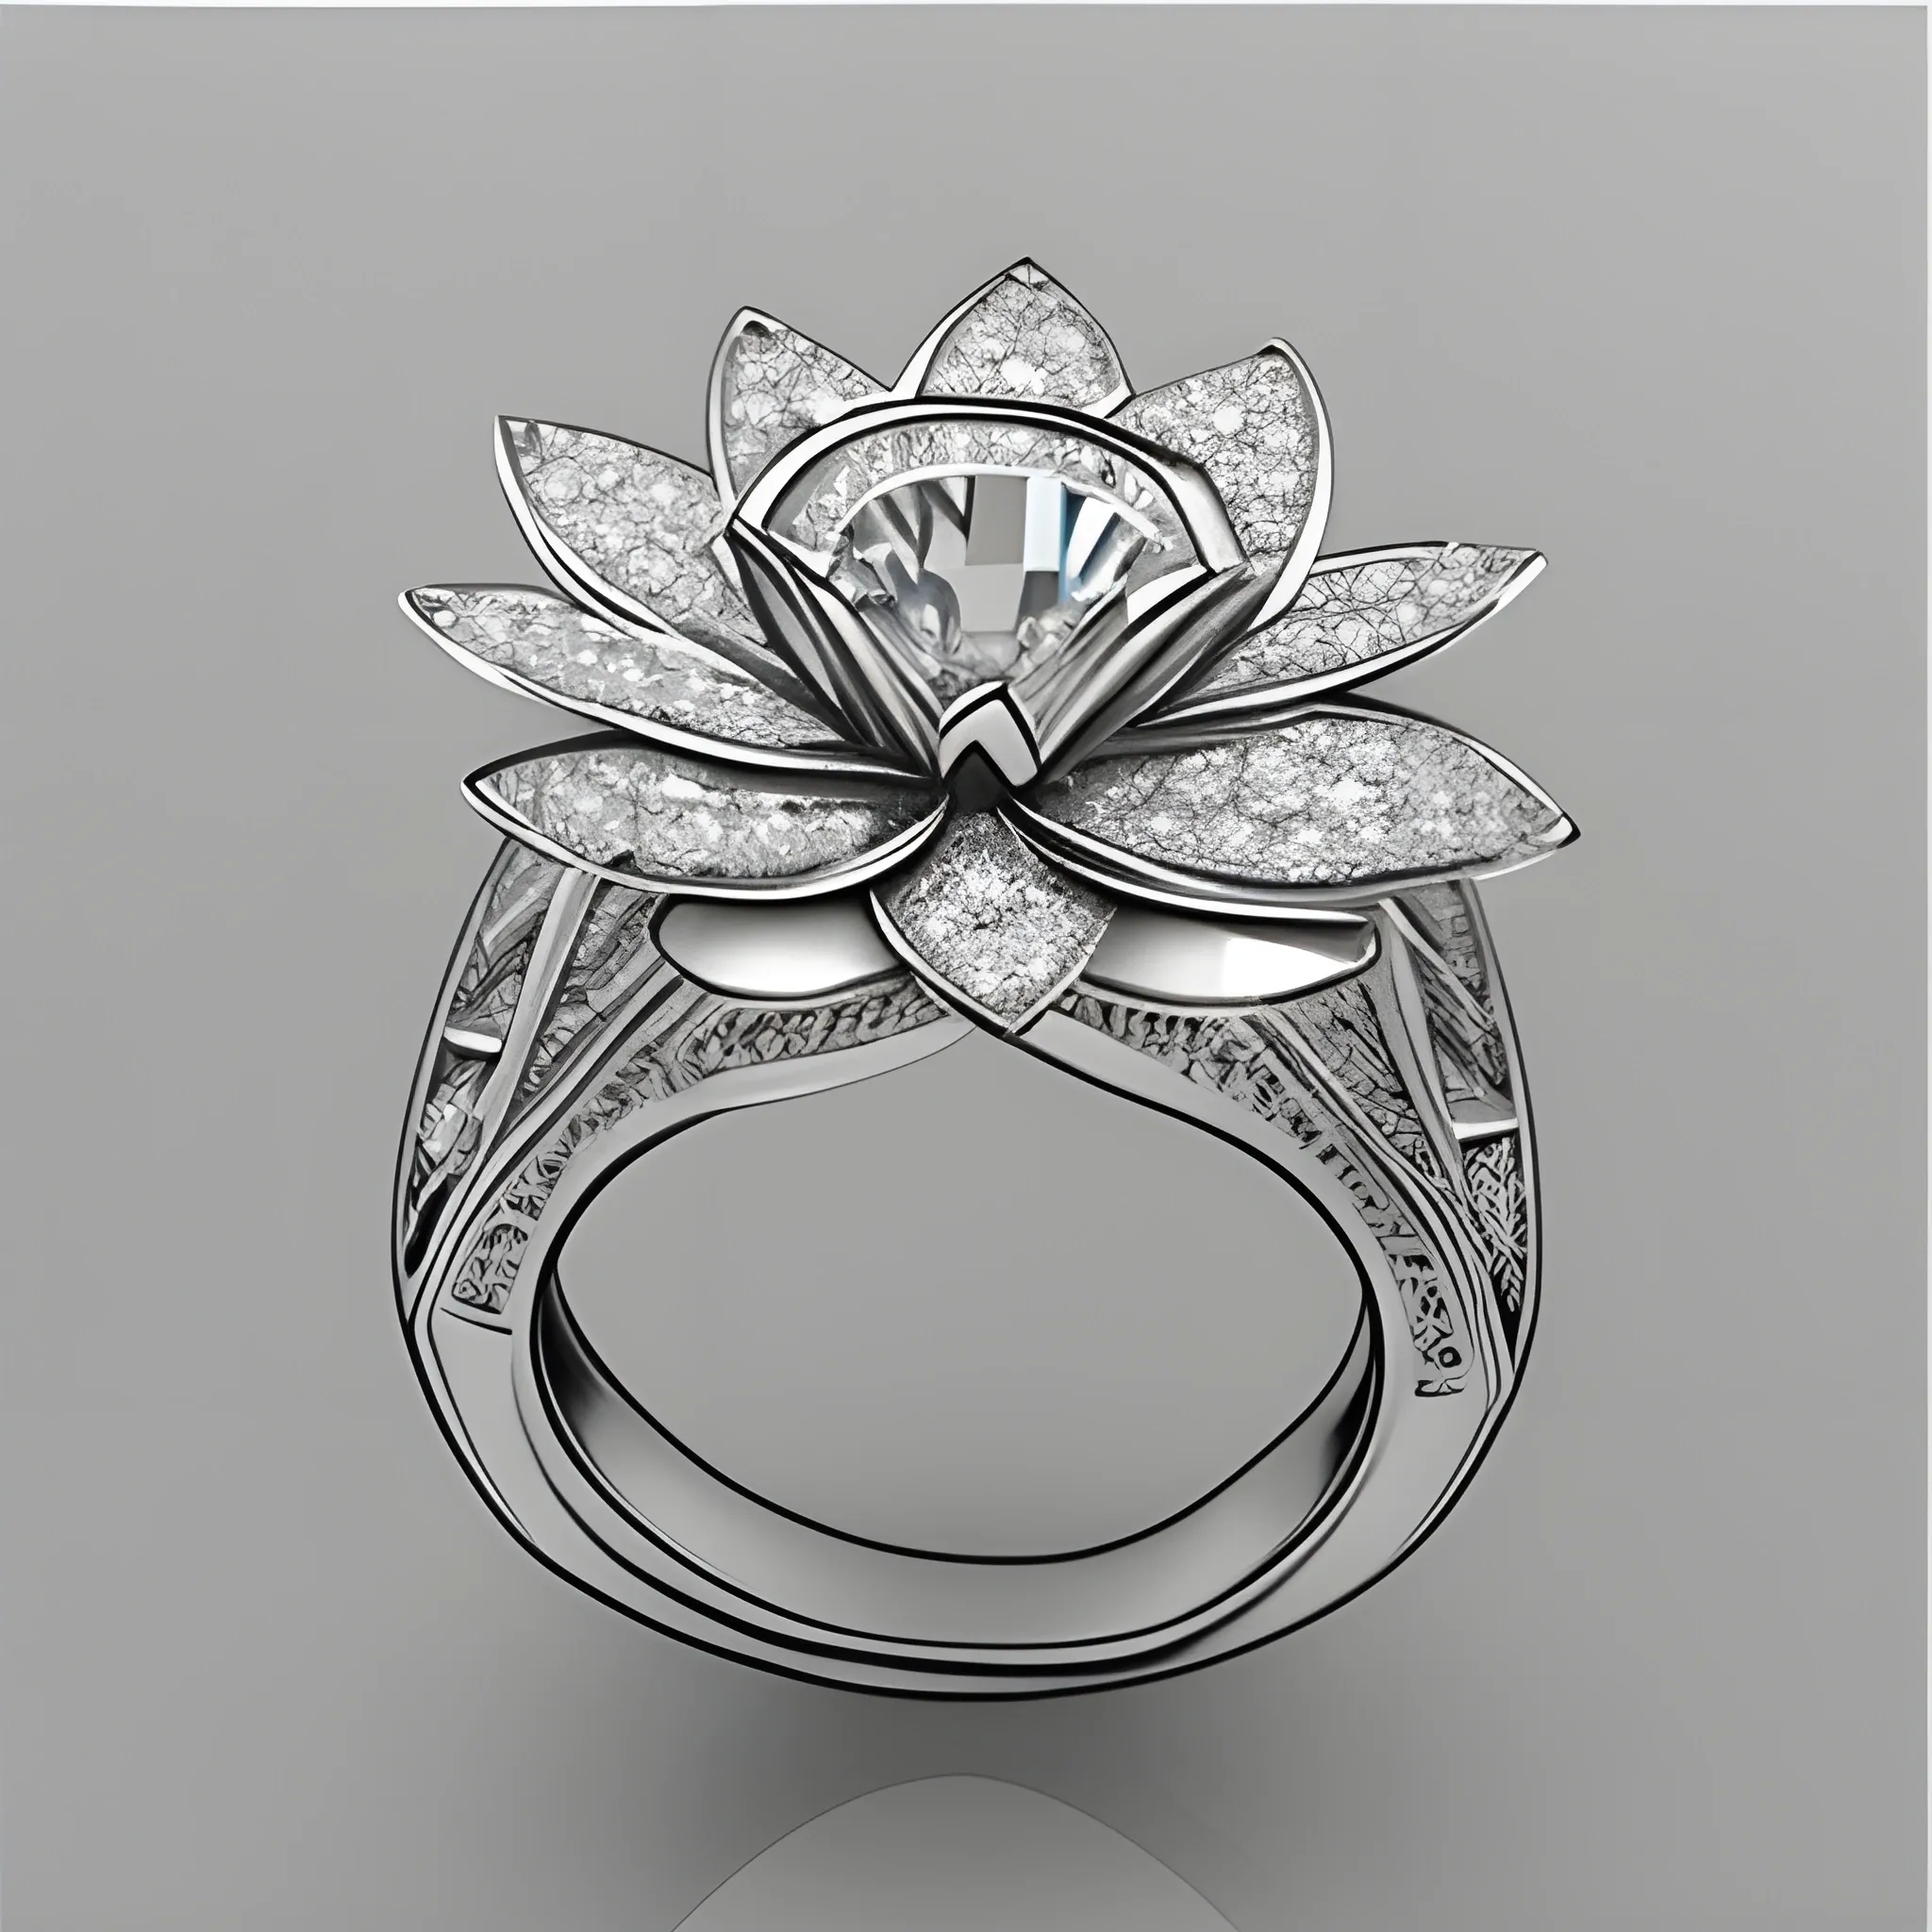 , Pencil Sketch Create a flower-shaped ring with a central white 0,05 carat diamond surrounded by 6 pice of drop shaped brown diamonds, fitting around the central brilliant
